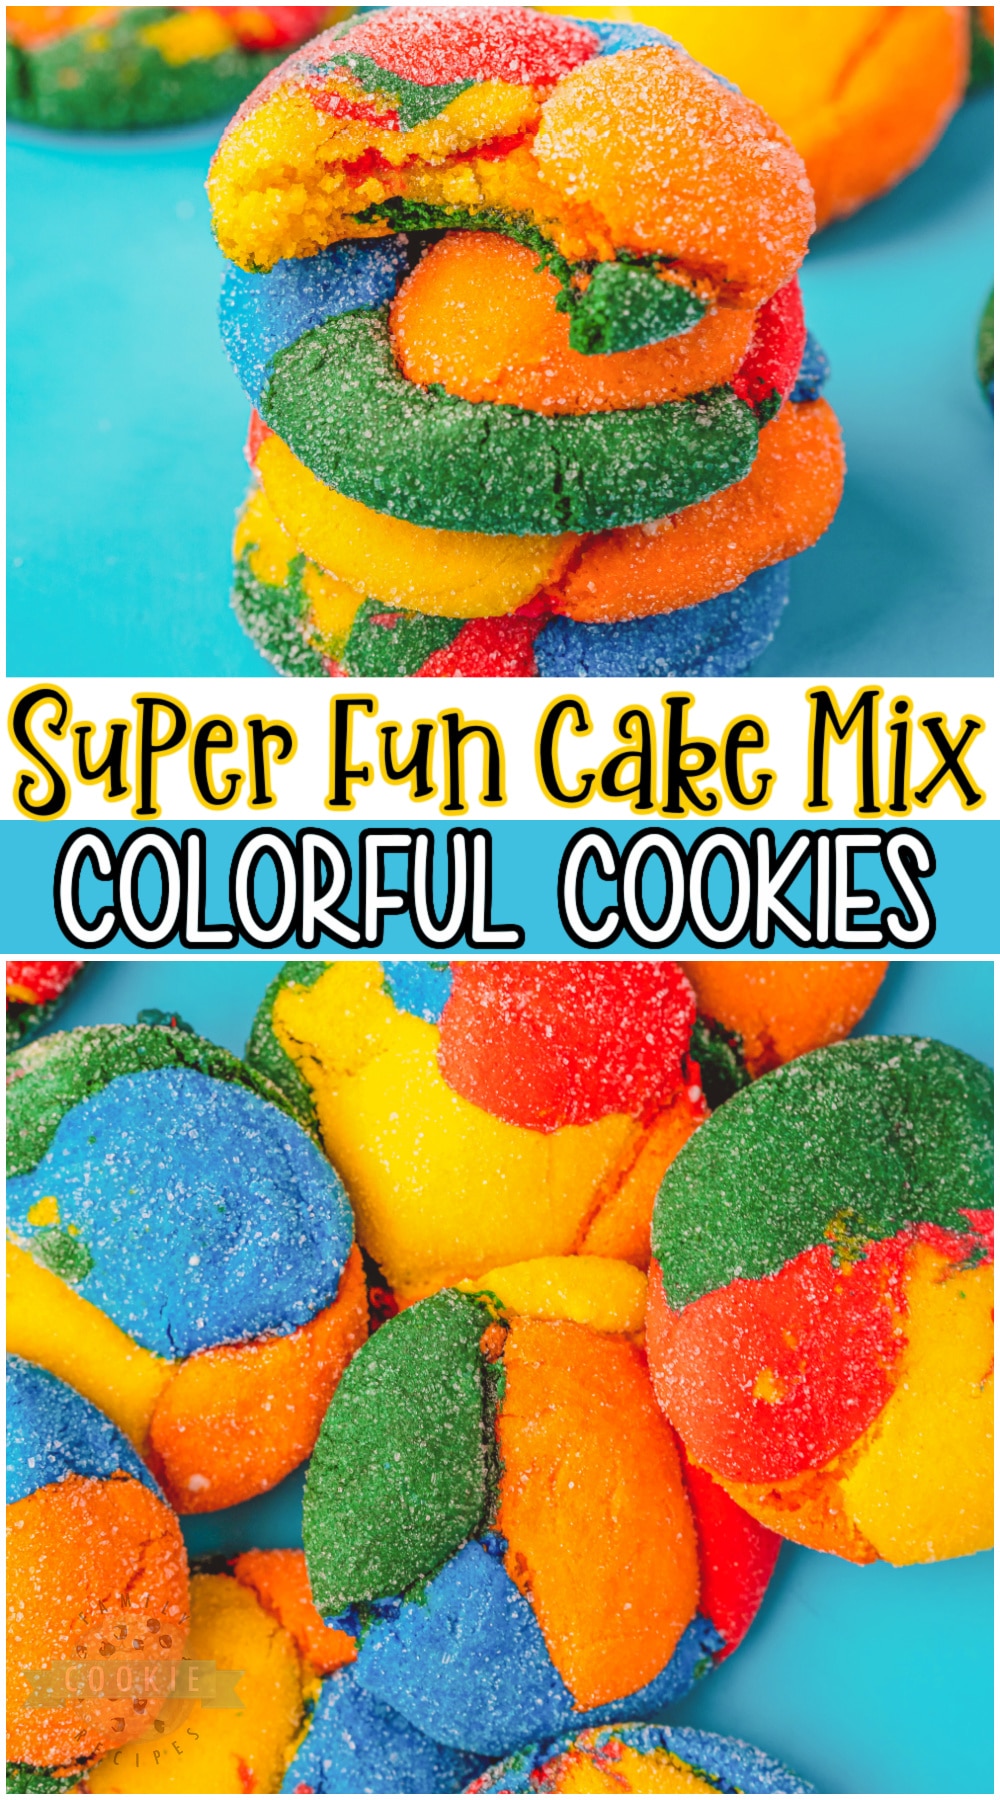 Bright & fun Colorful Cookies made with a cake mix! Simple recipe for soft, festive cookies perfect for Back To School. Your boxed cake mix is about to get an inventive and creative new upgrade! #colorful #cookies #backtoschool #colors #rainbow #baking #easyrecipe from FAMILY COOKIE RECIPES via @buttergirls